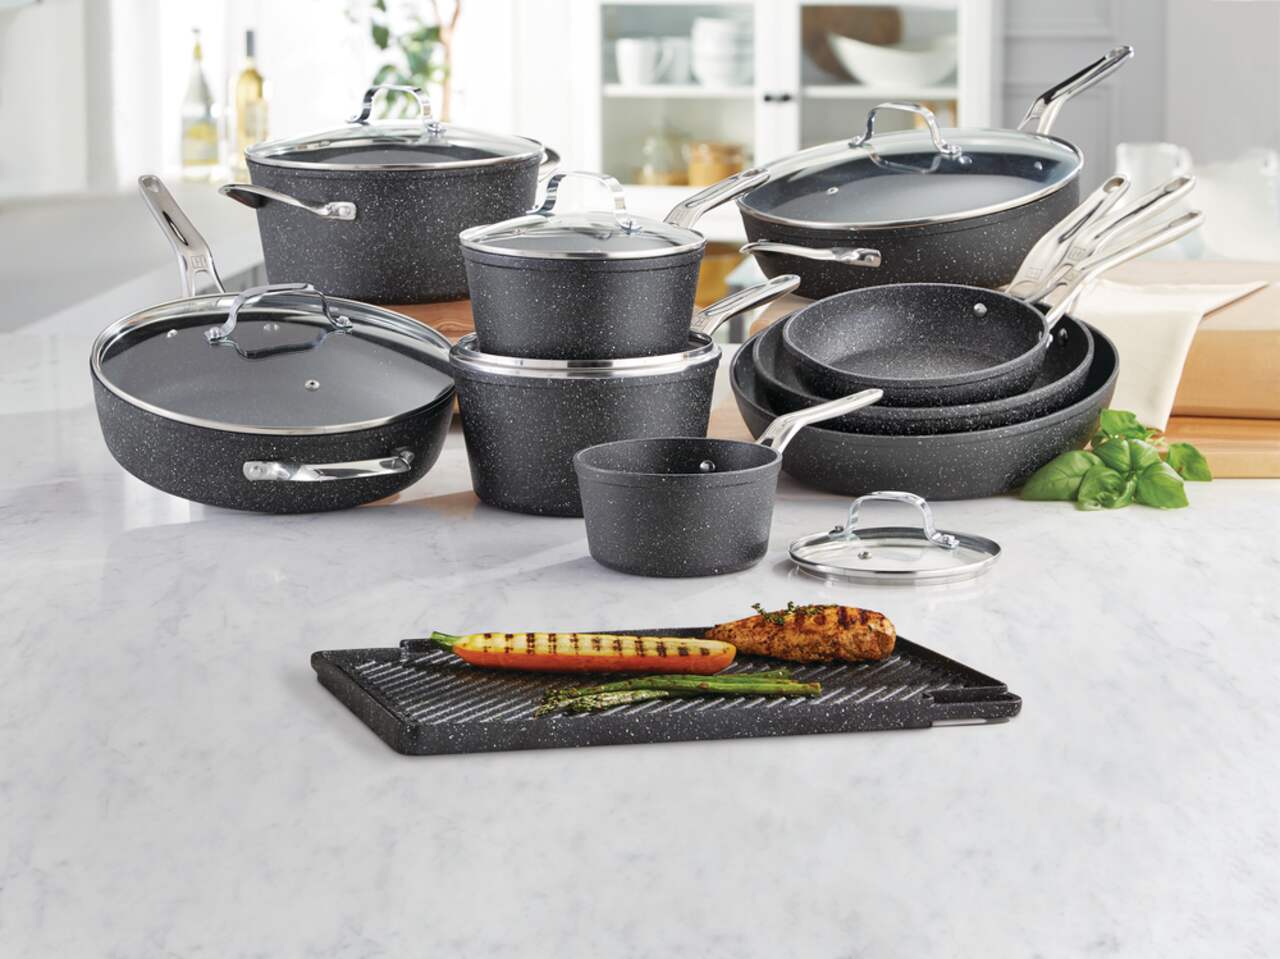 https://media-www.canadiantire.ca/product/living/kitchen/cookware/1427071/heritage-rock-10pc-forged-non-stick-ef7de0f4-2ef9-4601-883f-5de16554f620.png?imdensity=1&imwidth=1244&impolicy=mZoom